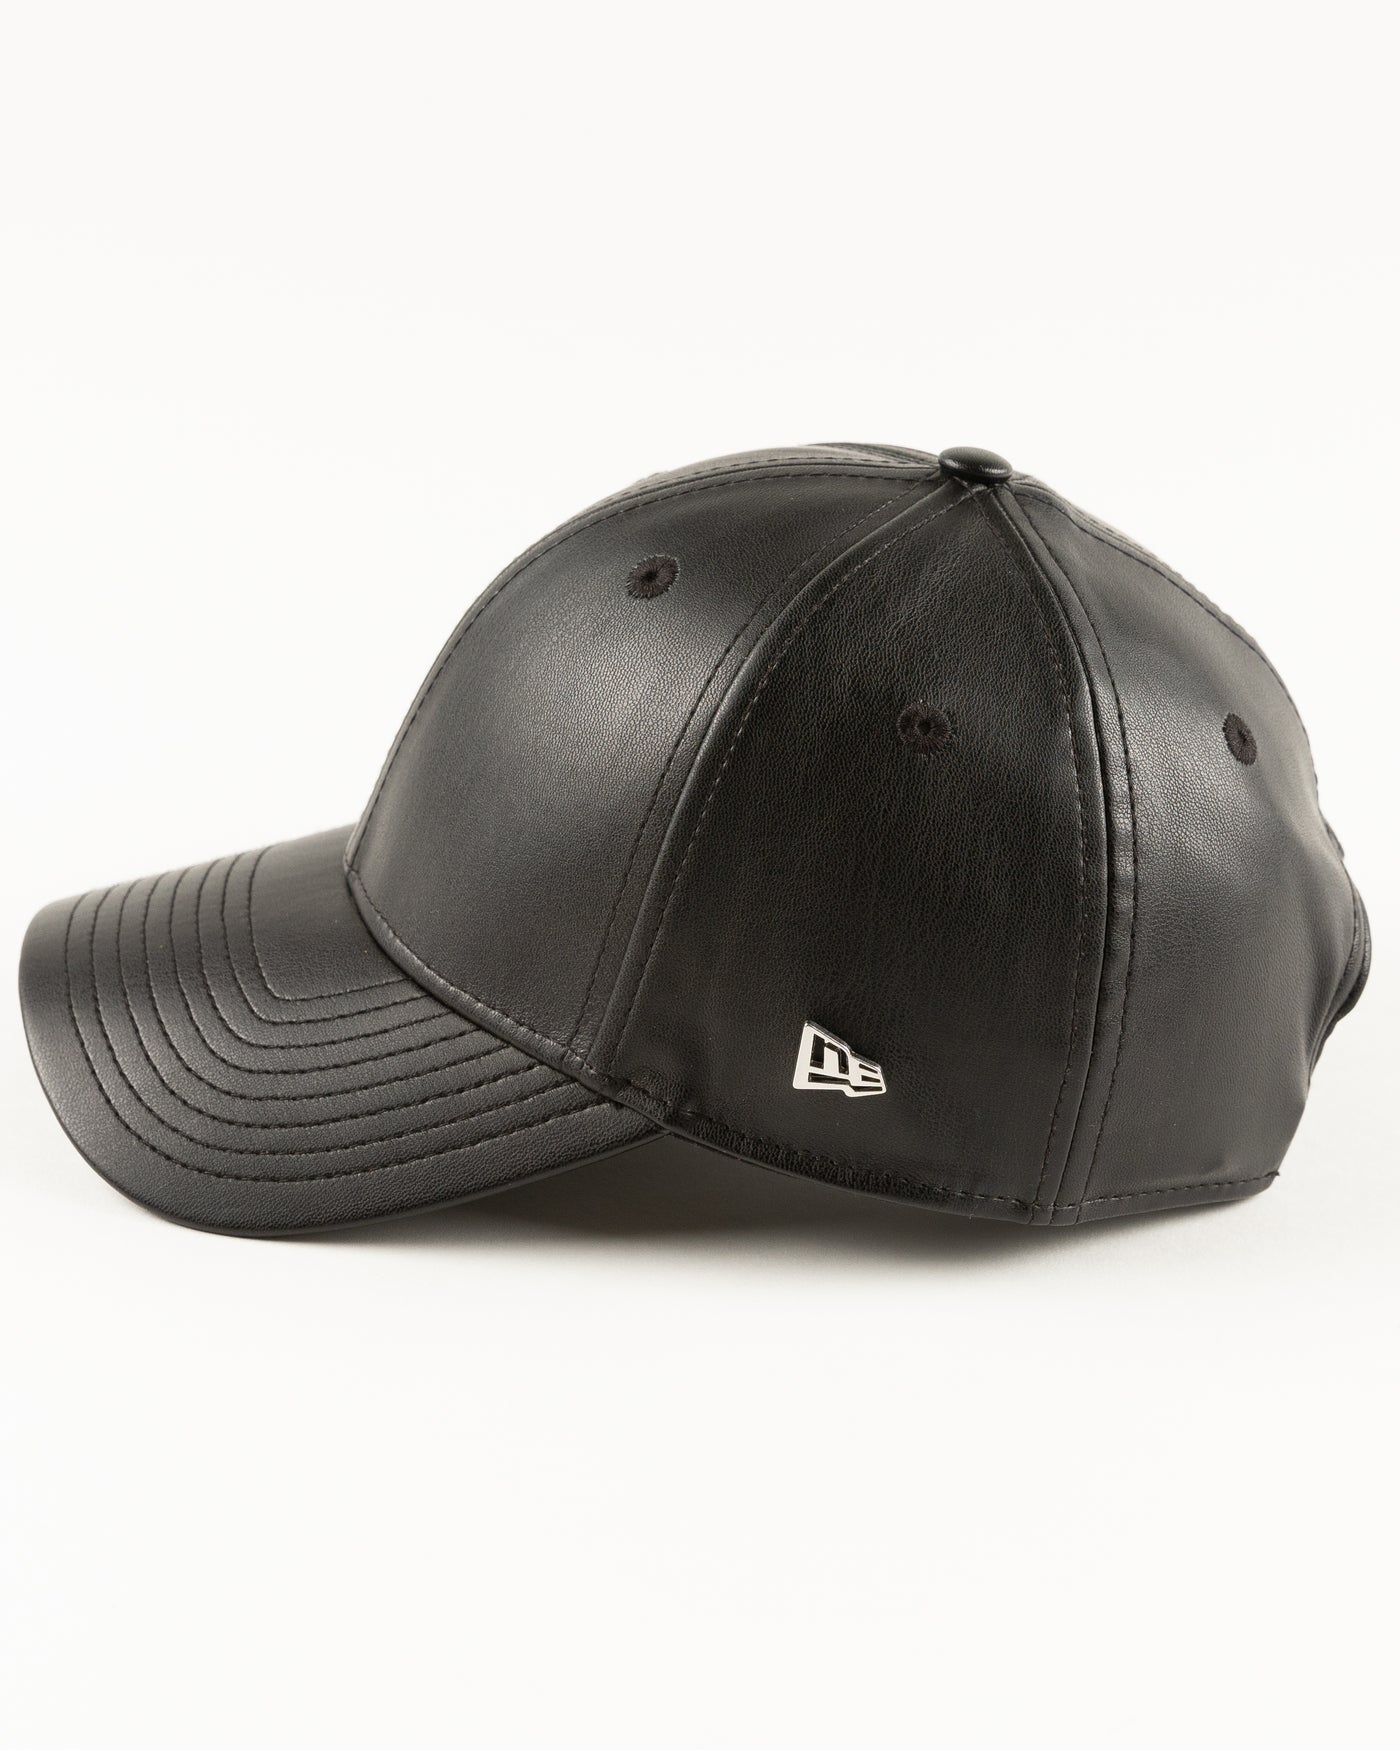 black leather New Era cap with Chicago Blackhawks four feathers logo in silver pin on front - left side lay flat